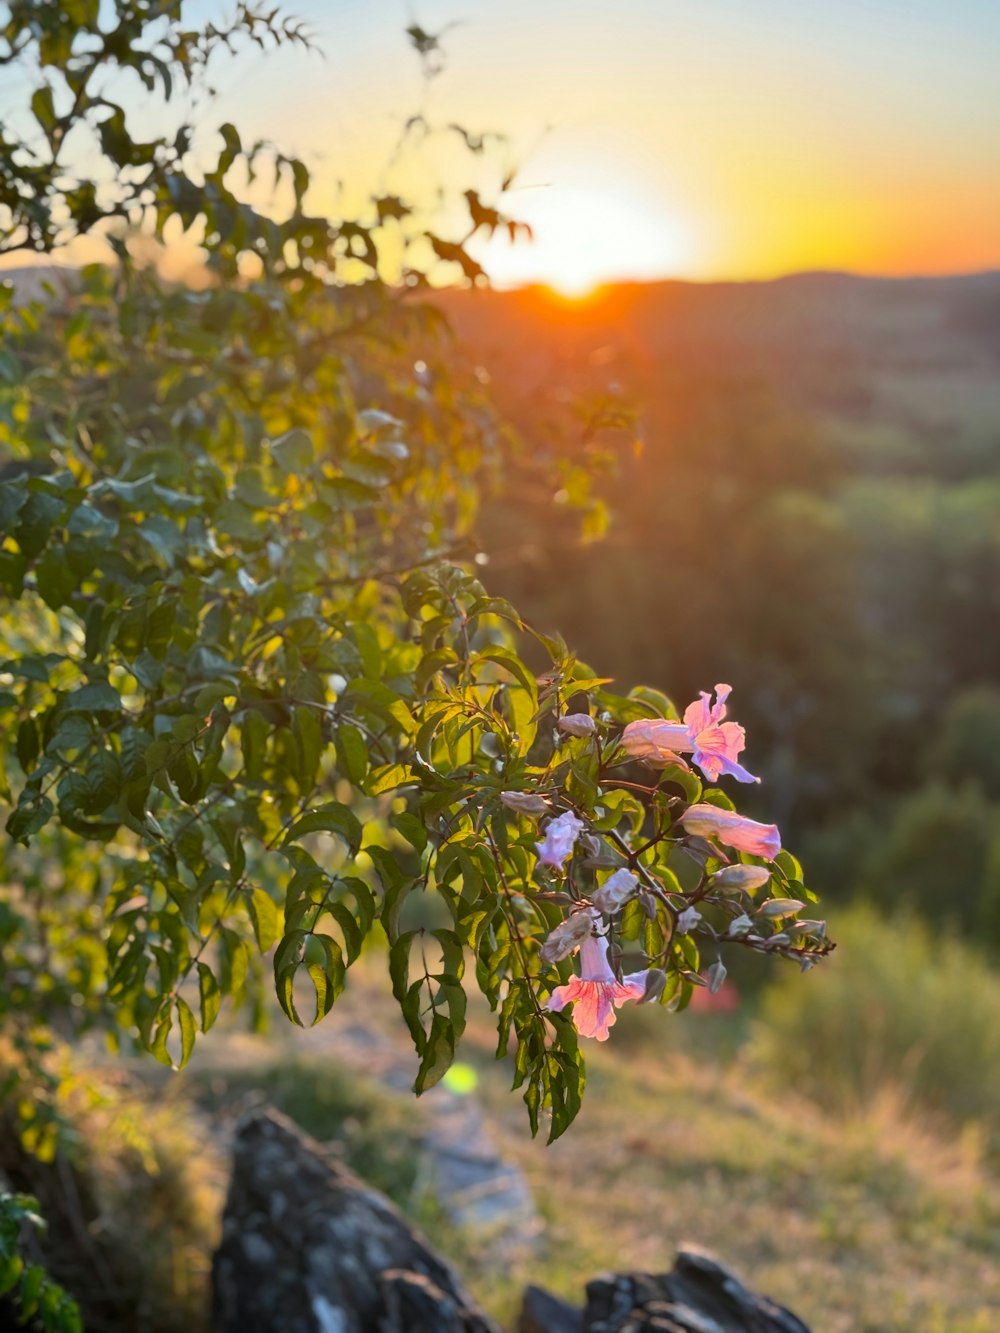 a tree with pink flowers in the foreground and a sunset in the background